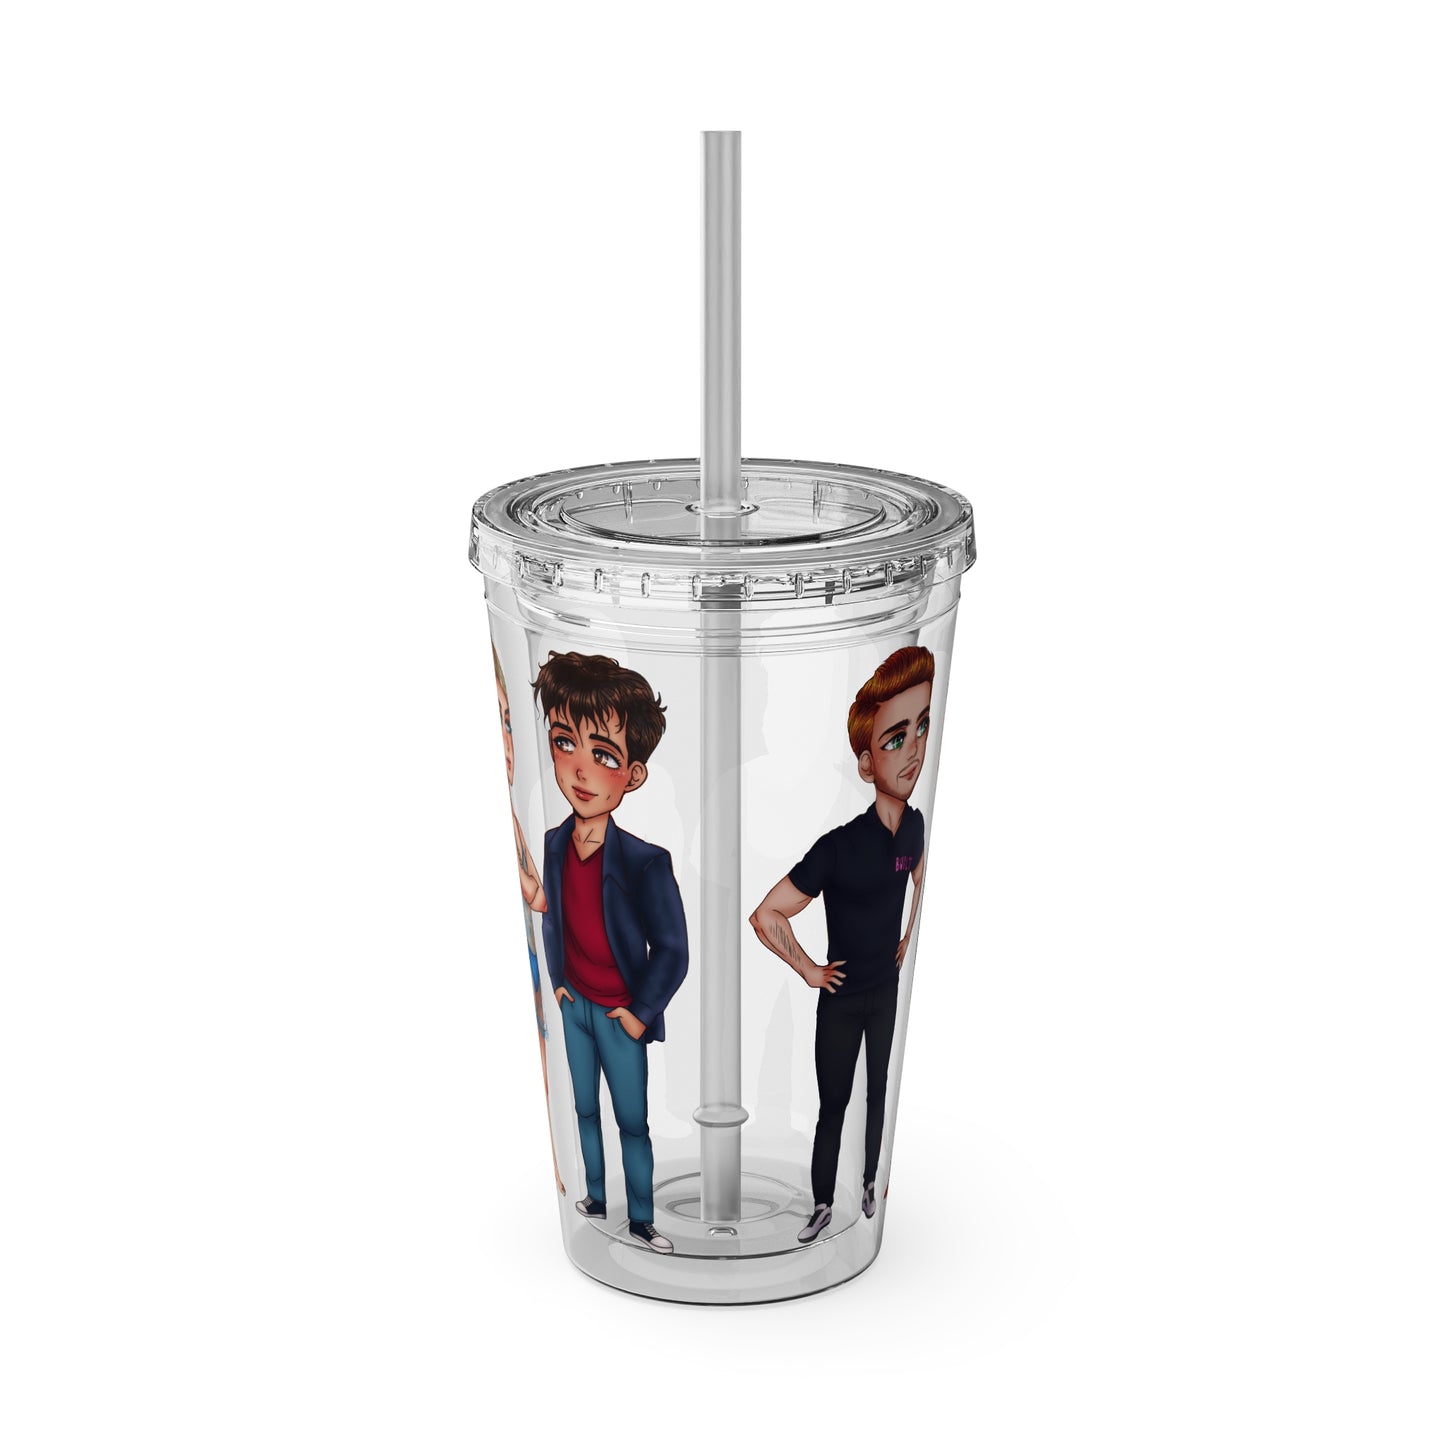 The Built For You Crew Tumbler with Straw, 16oz